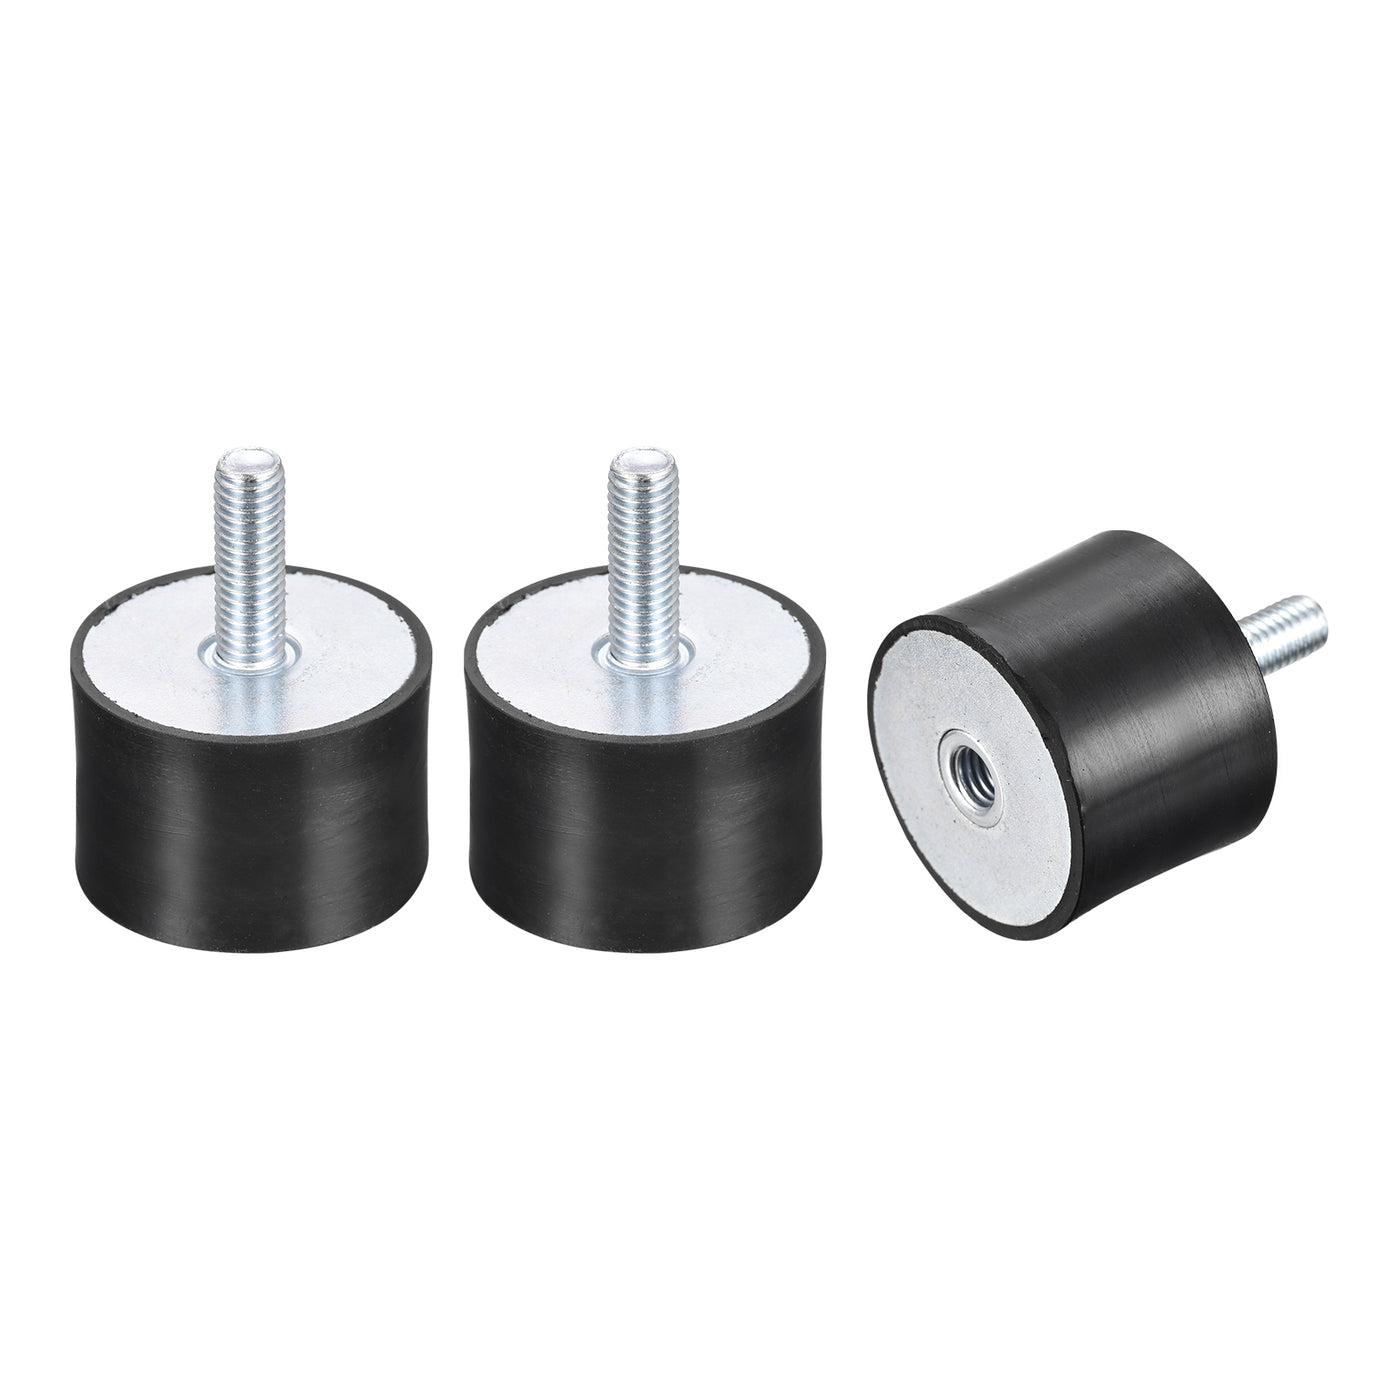 uxcell Uxcell Rubber Mounts 3pcs M8 Male/Female Vibration Isolator Shock Absorber D40mmxH30mm